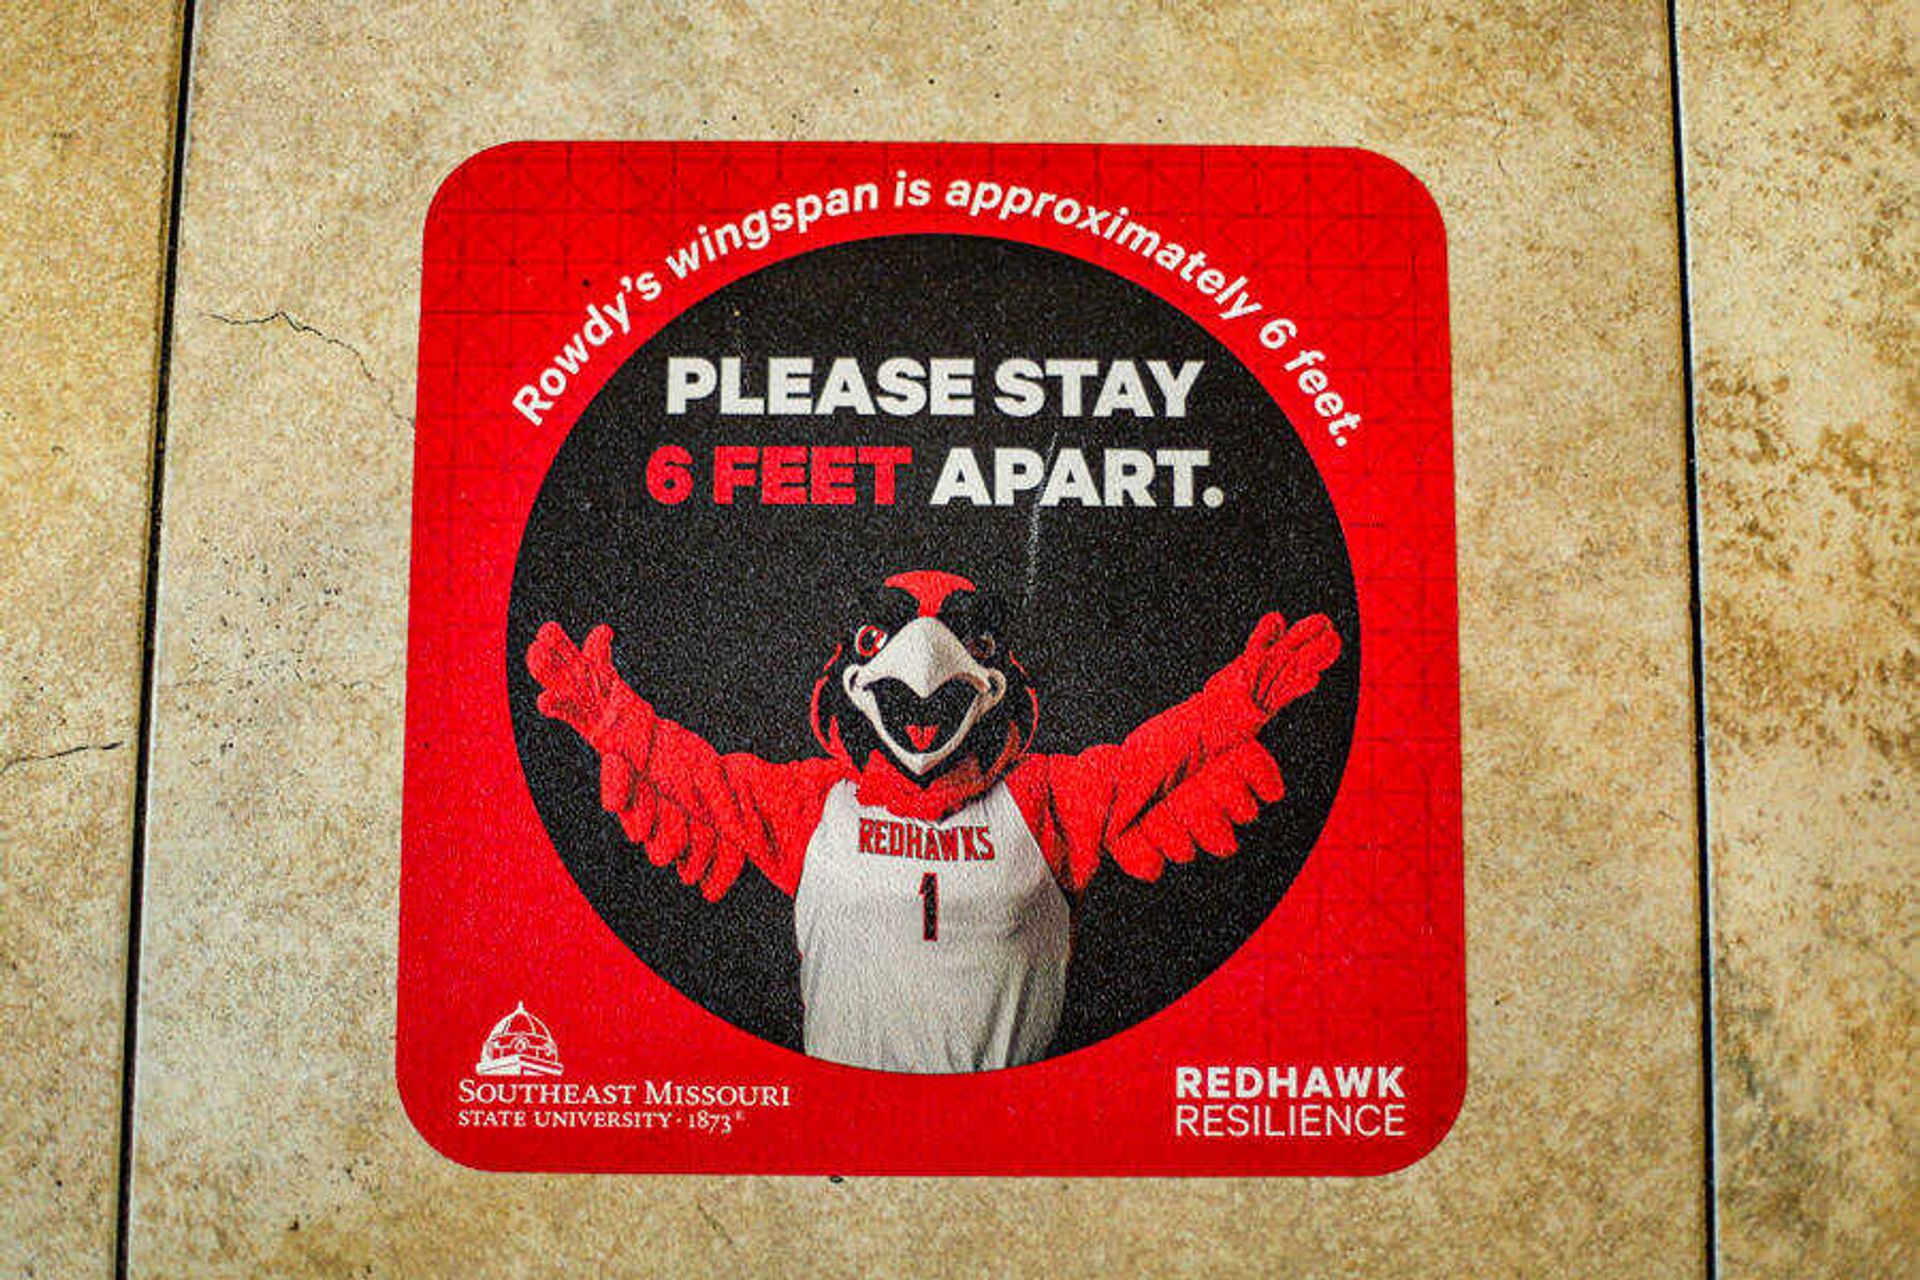 Decals have been added to the floor of many campus locations to guide students in social distancing in public.